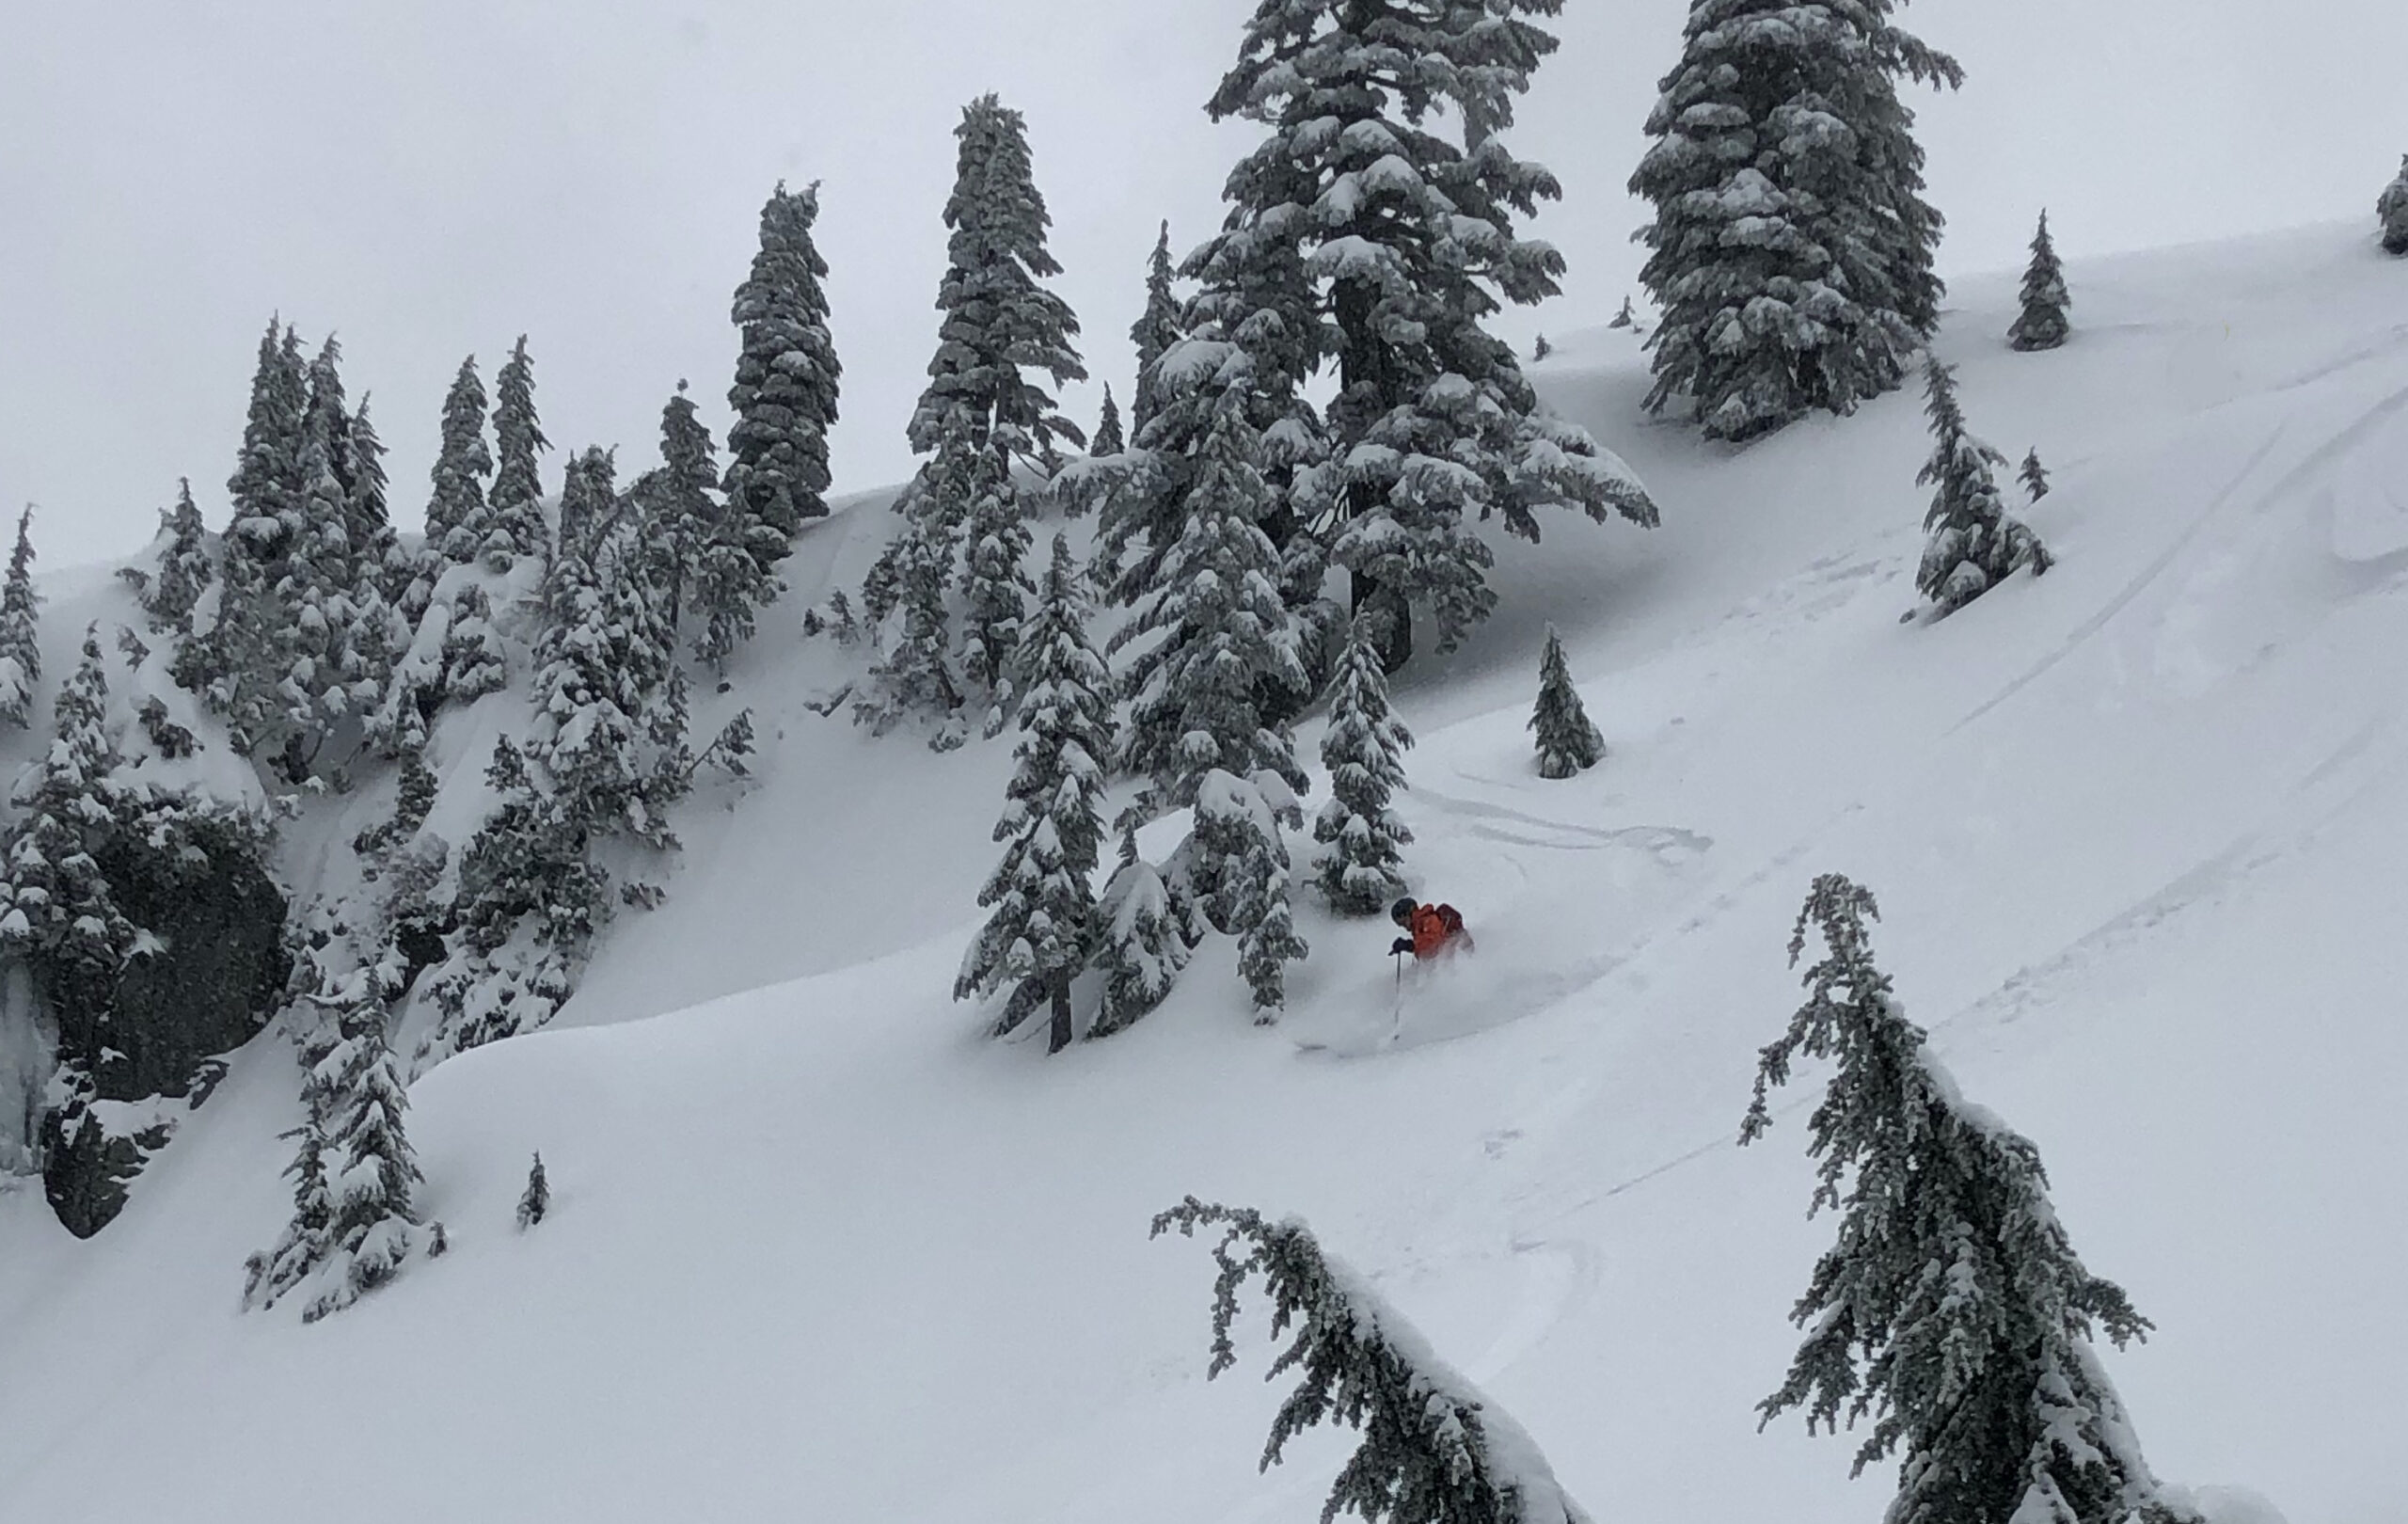 Powder backcountry skiing in Cypress Park